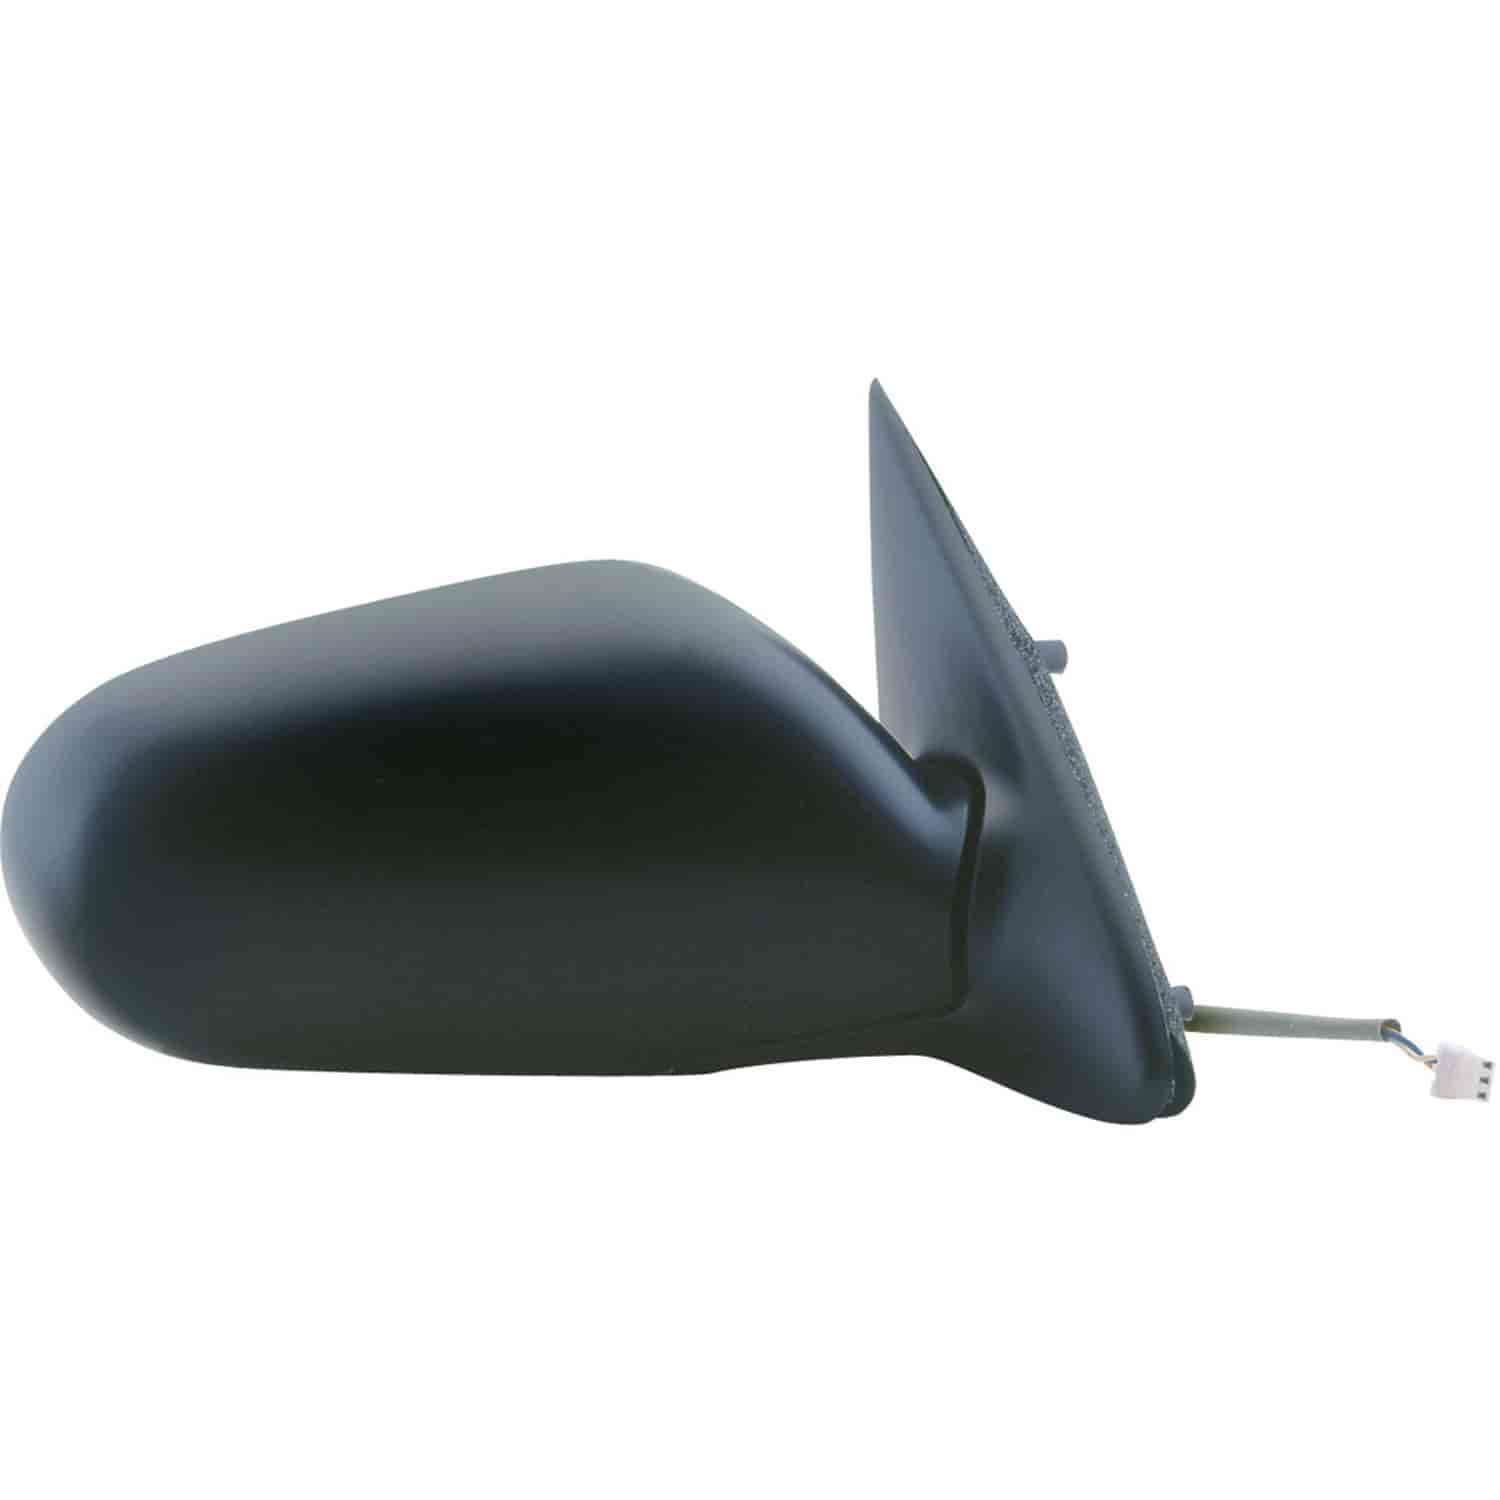 OEM Style Replacement mirror for 93-97 Nissan Altima passenger side mirror tested to fit and functio